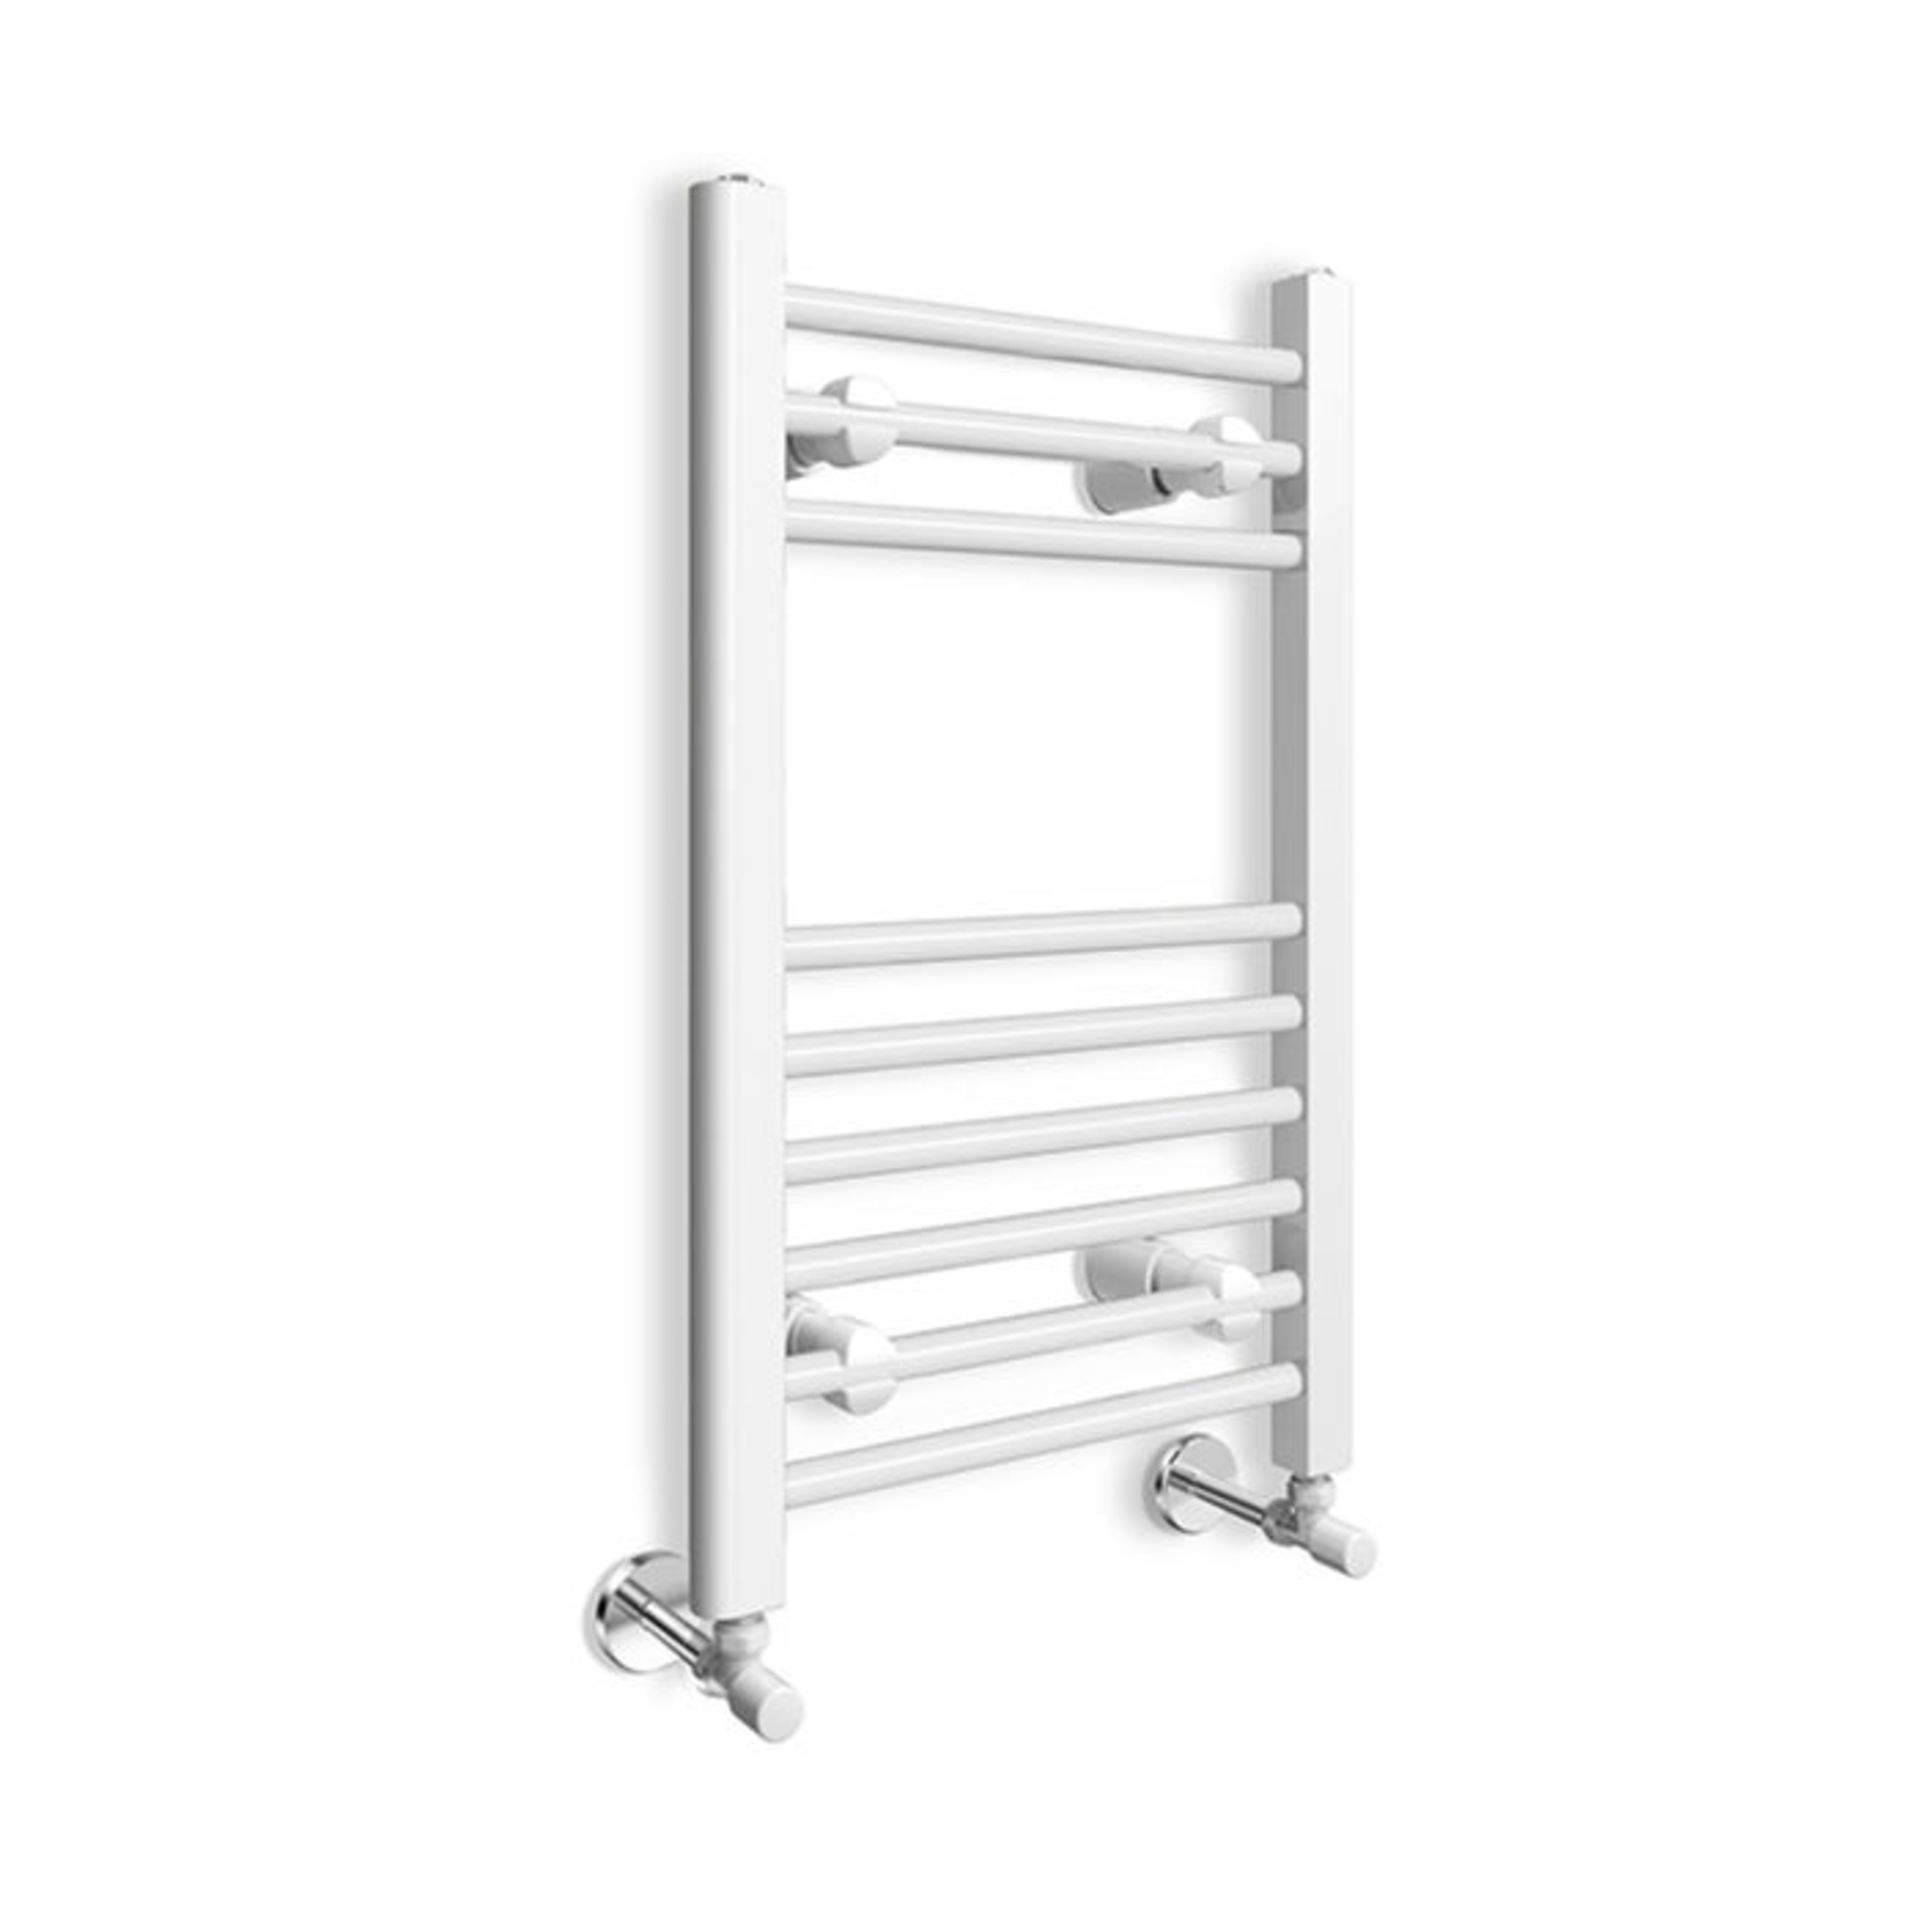 (JM179)650x400mm White Heated Towel Radiator. Made from low carbon steel Finished with a high